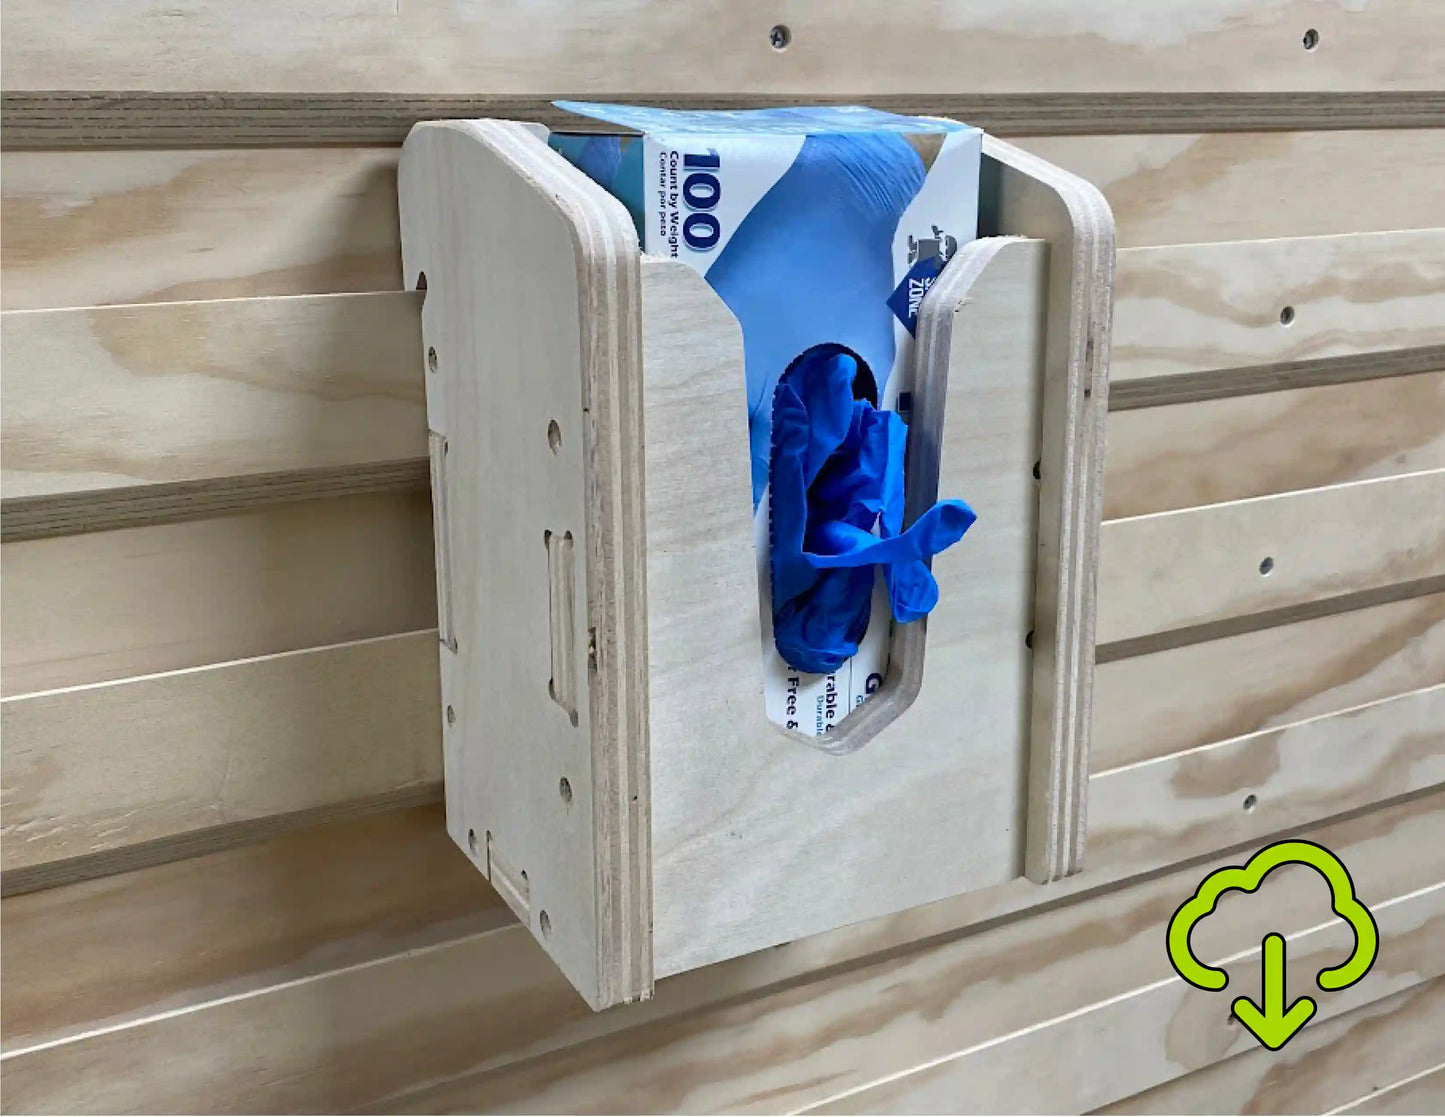 CNC Router Files French Cleat Rubber Glove Dispenser